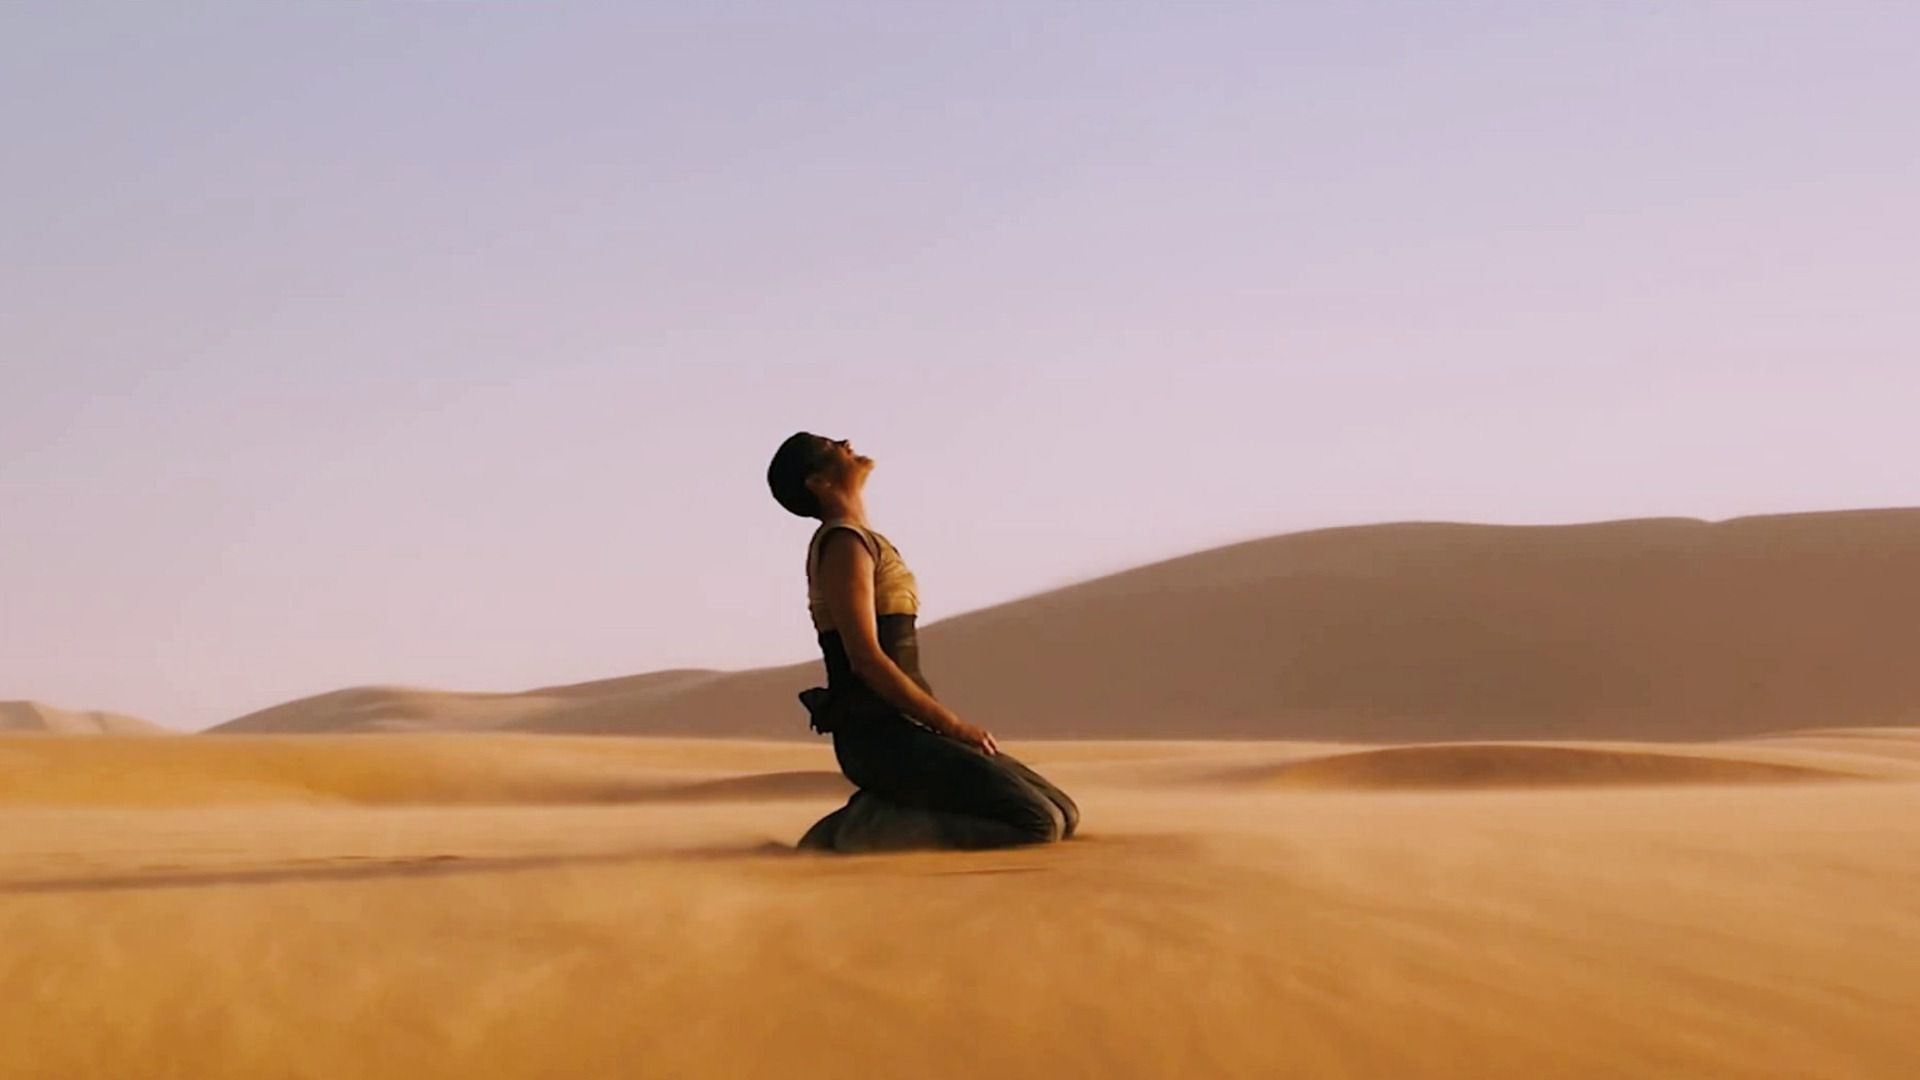 Imperator Furiosa (Charlize Theron) kneeling and looking up with pain in a desert in Mad Max: Fury Road